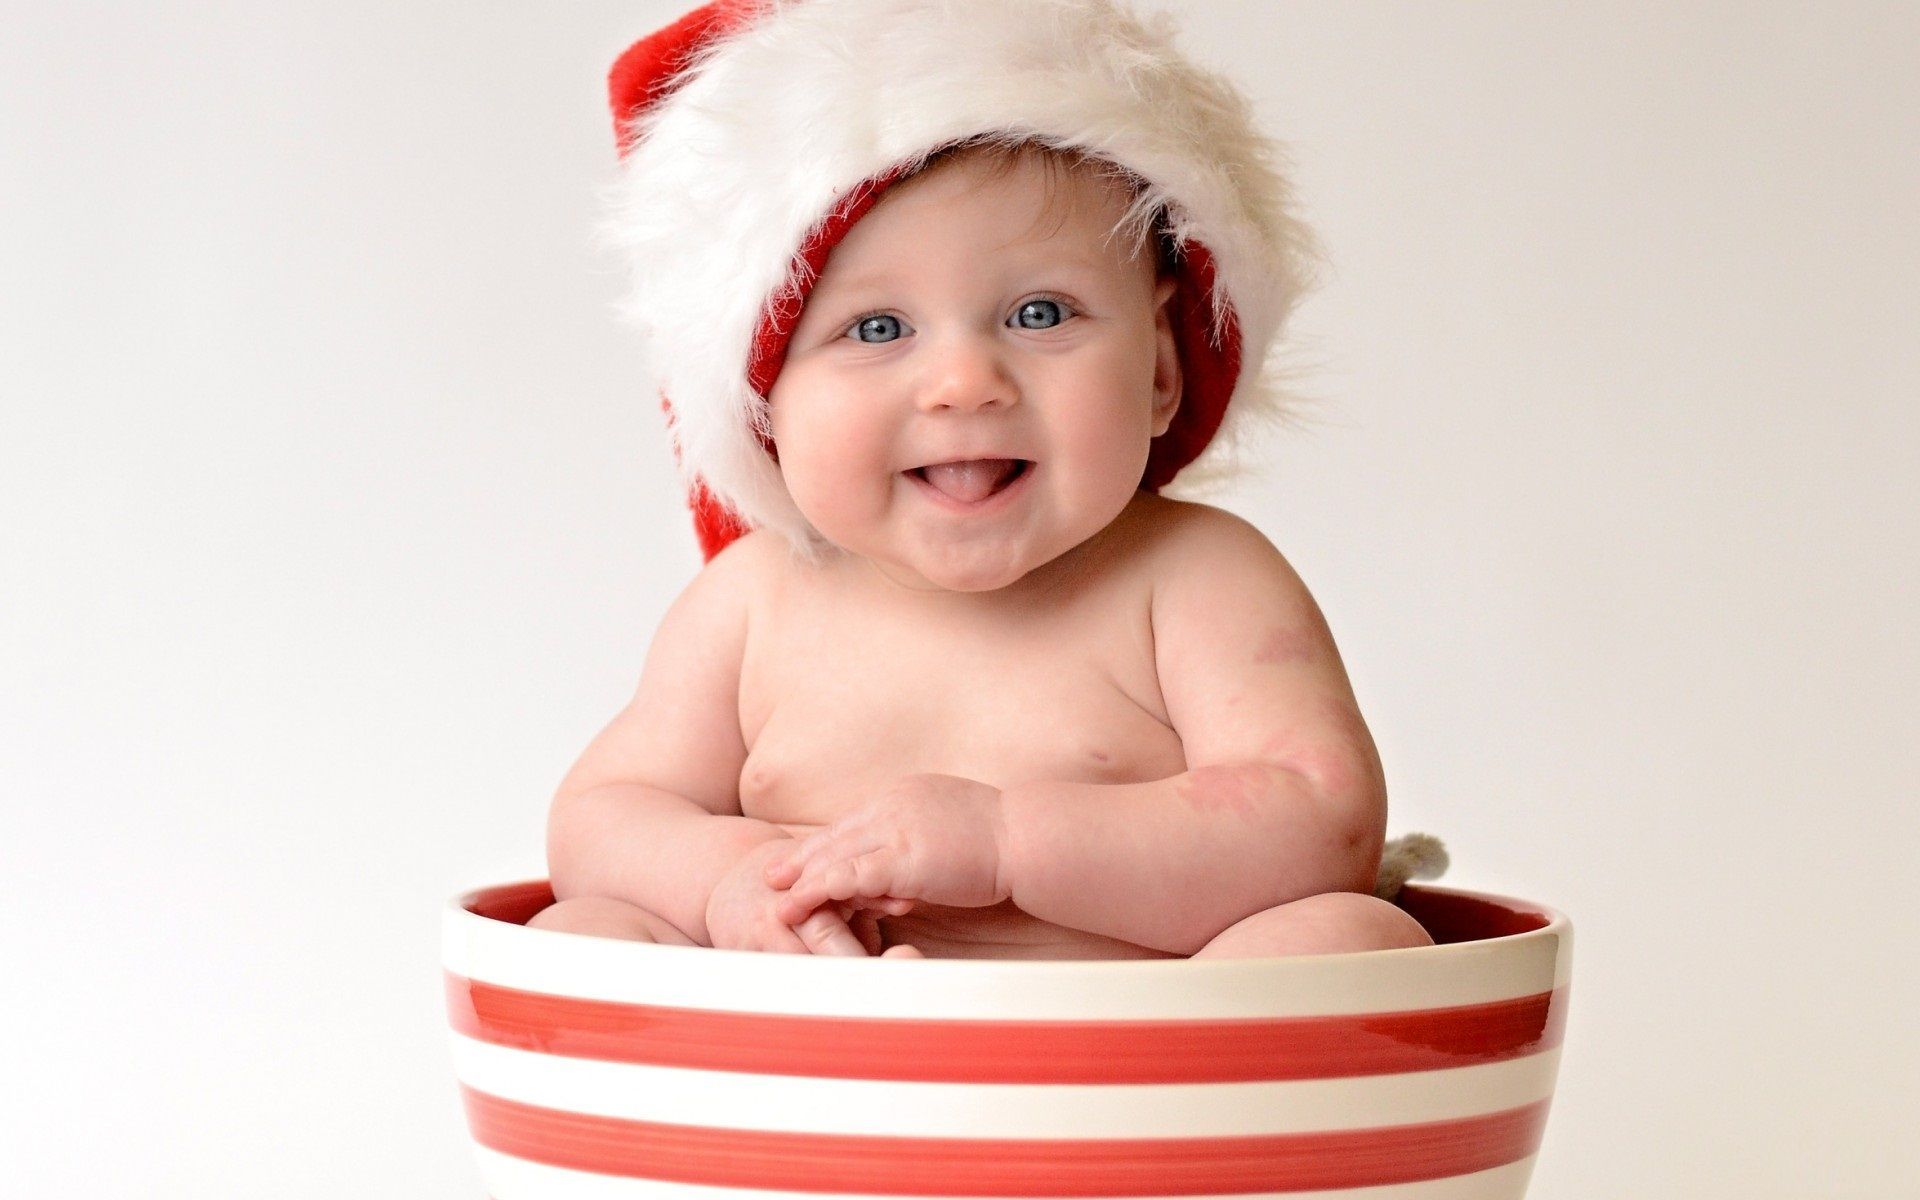 Baby Smile In Cup. Cute baby picture, Baby boy picture, Cute baby boy